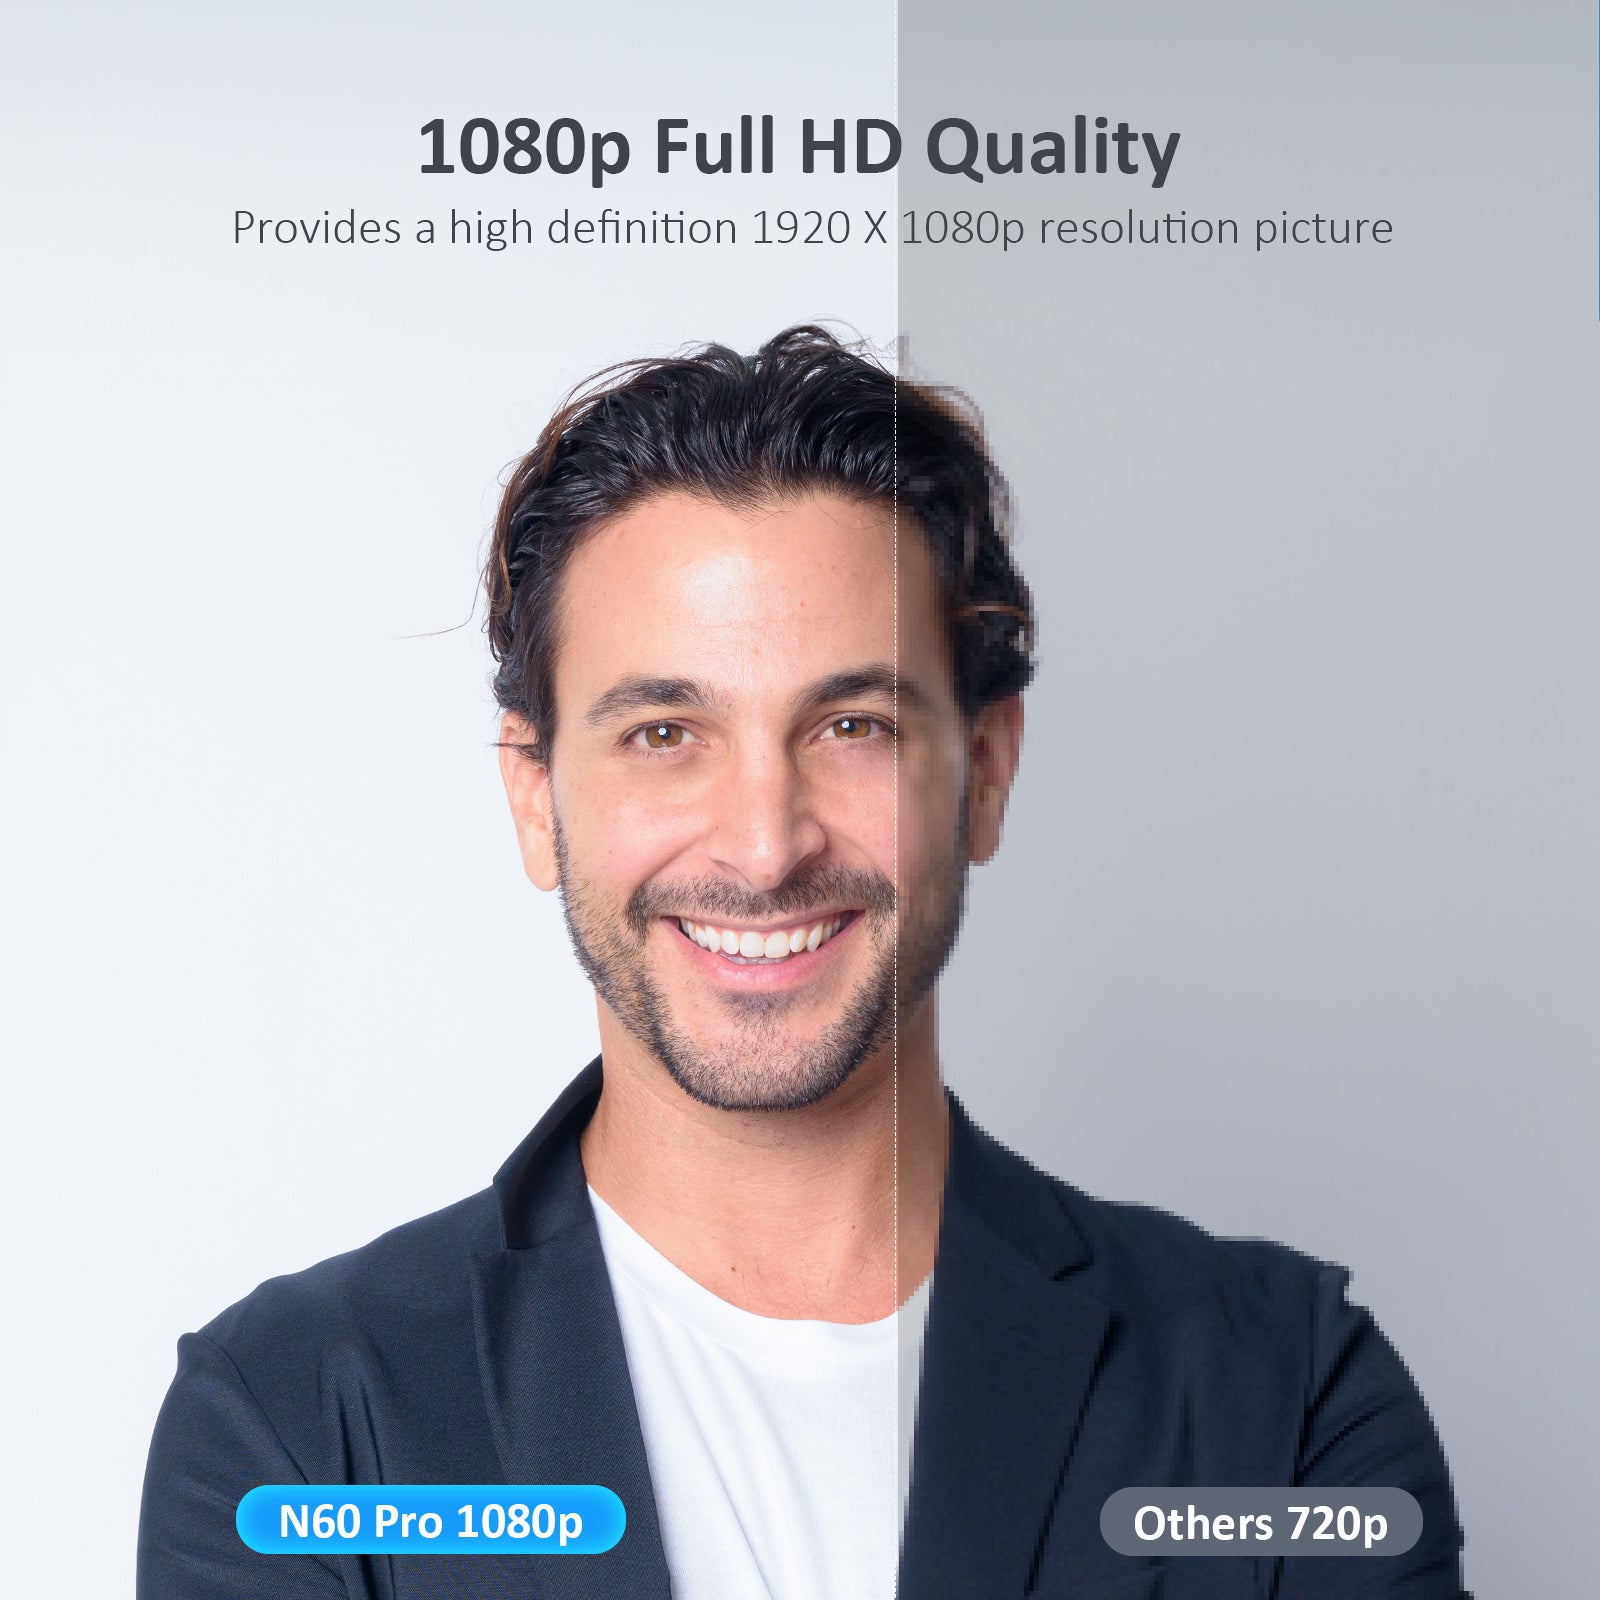 Comparison of N60 Pro's 1080P High Definition Quality with 720P Quality of Other Brands